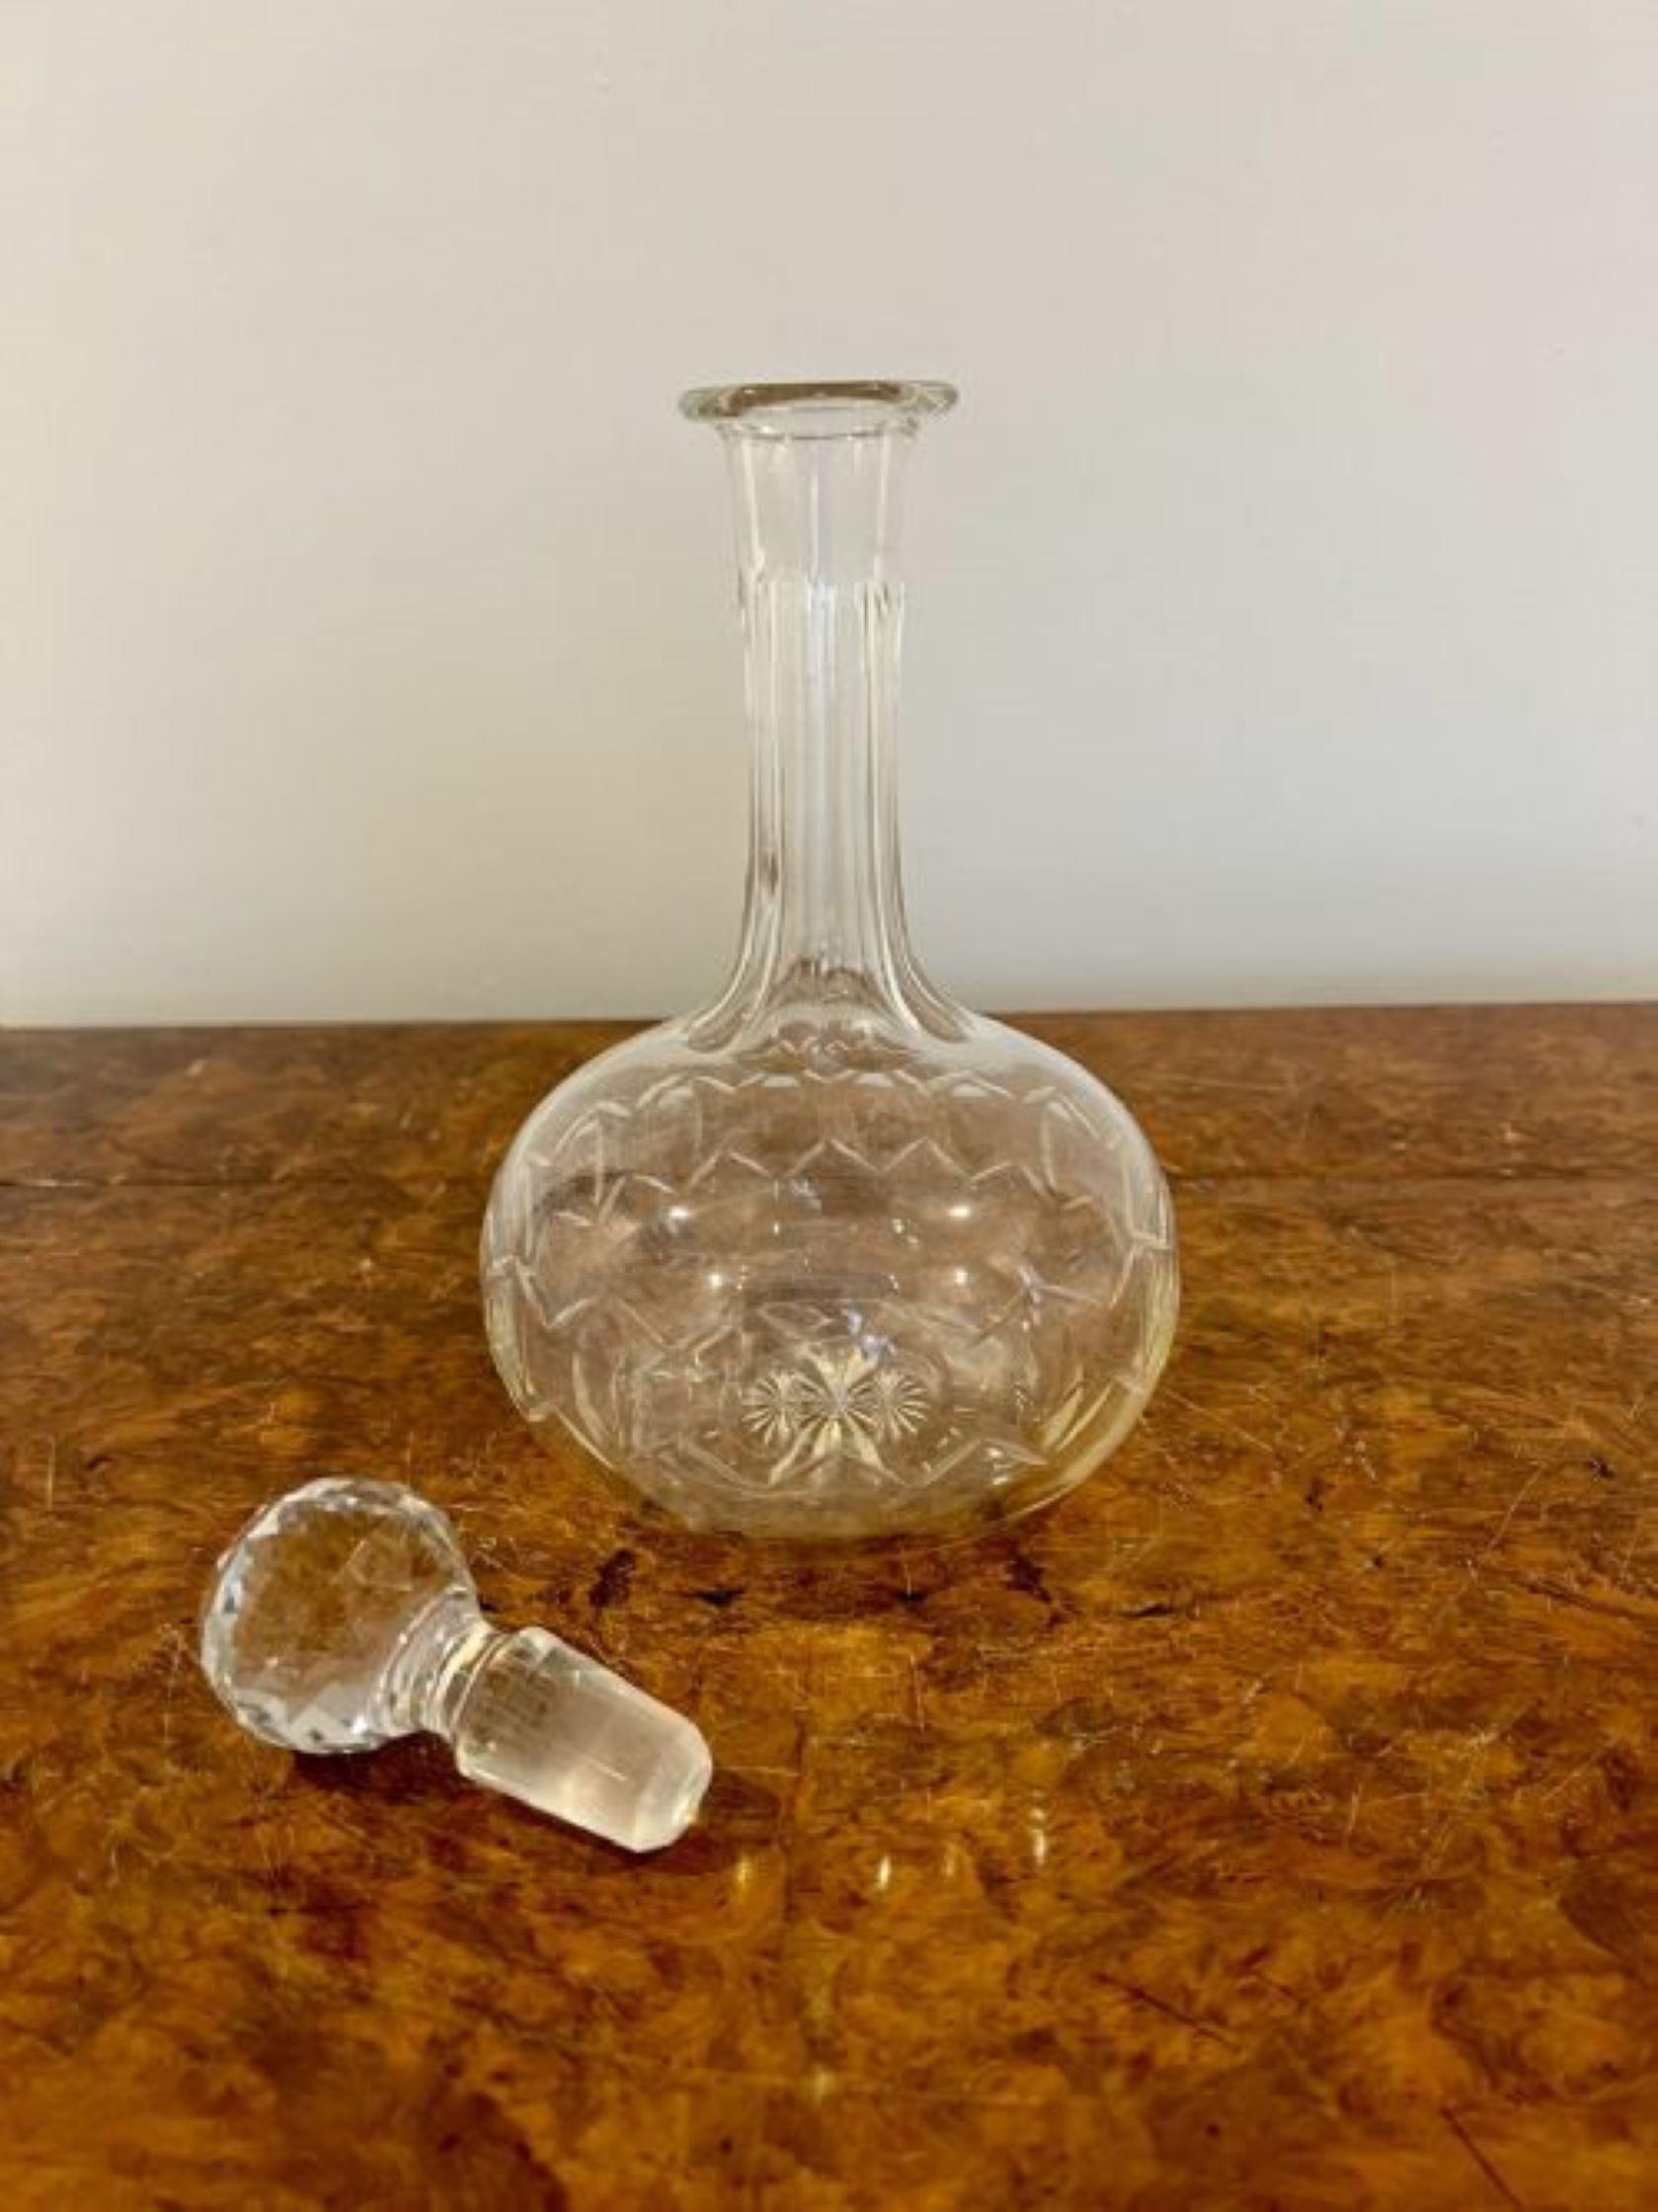 Antique Edwardian cut glass decanter having a quality cut glass decanter with the original stopper